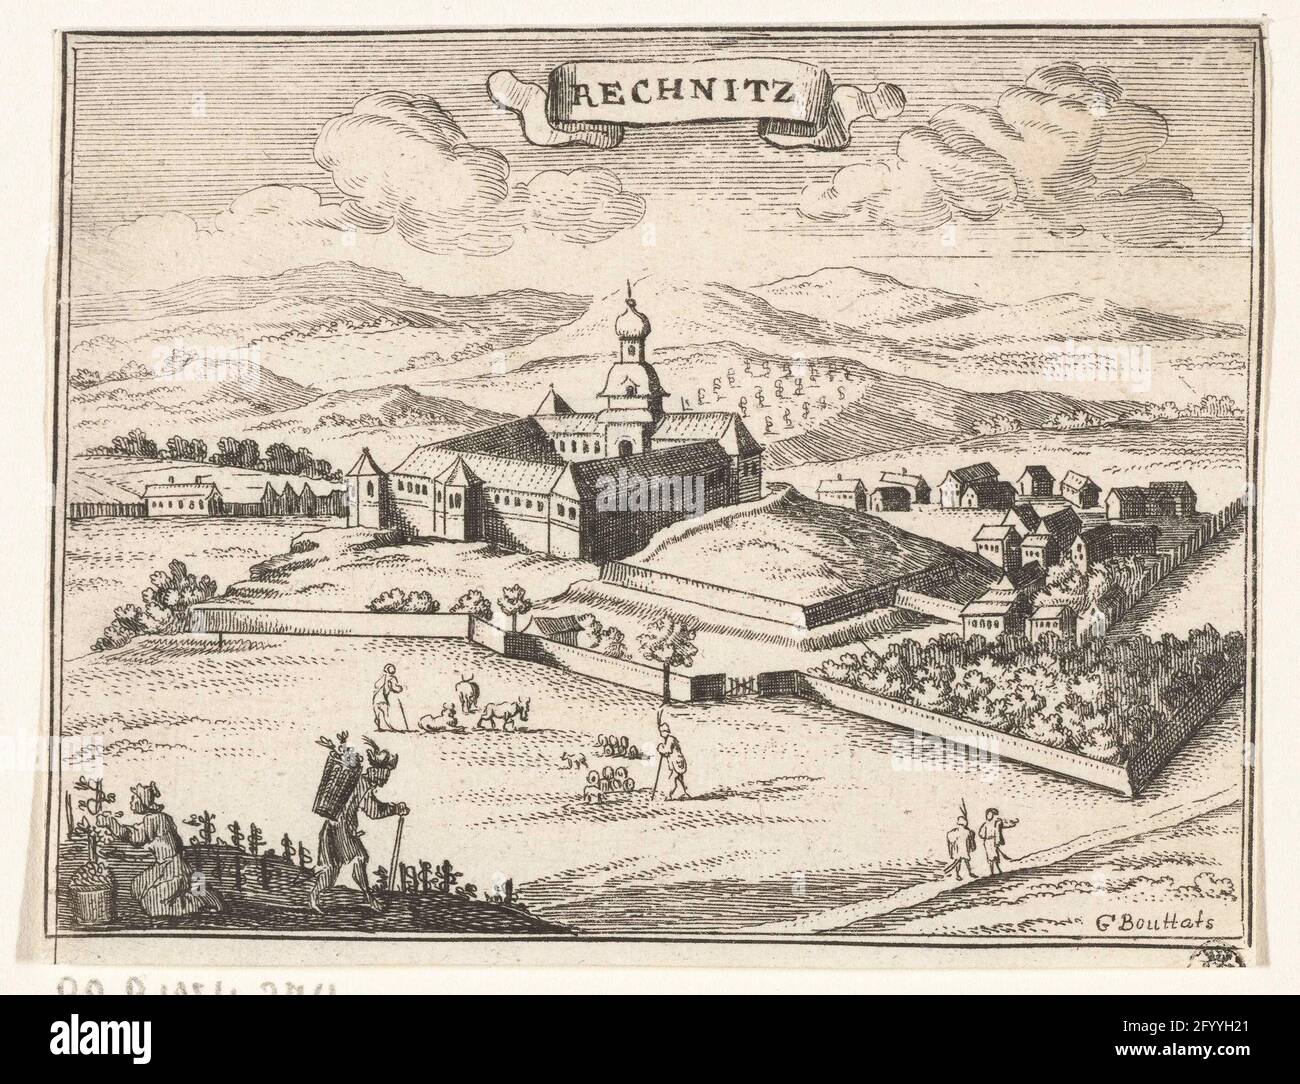 View of Rechnitz; Topographical images of Austria, Hungary and the Balkans; Short radiance, and the Aen-Wysinghe der Plaetsen in Desen Boeck, with the Hunen Heijghen Stand, Portinaal Uyt-Ghebeldt, in Oostryck. View of the city of Rechnitz. In the foreground, outside the city walls, grape grants are working. Above the cityscape a cartouche with the name of the city. Stock Photo